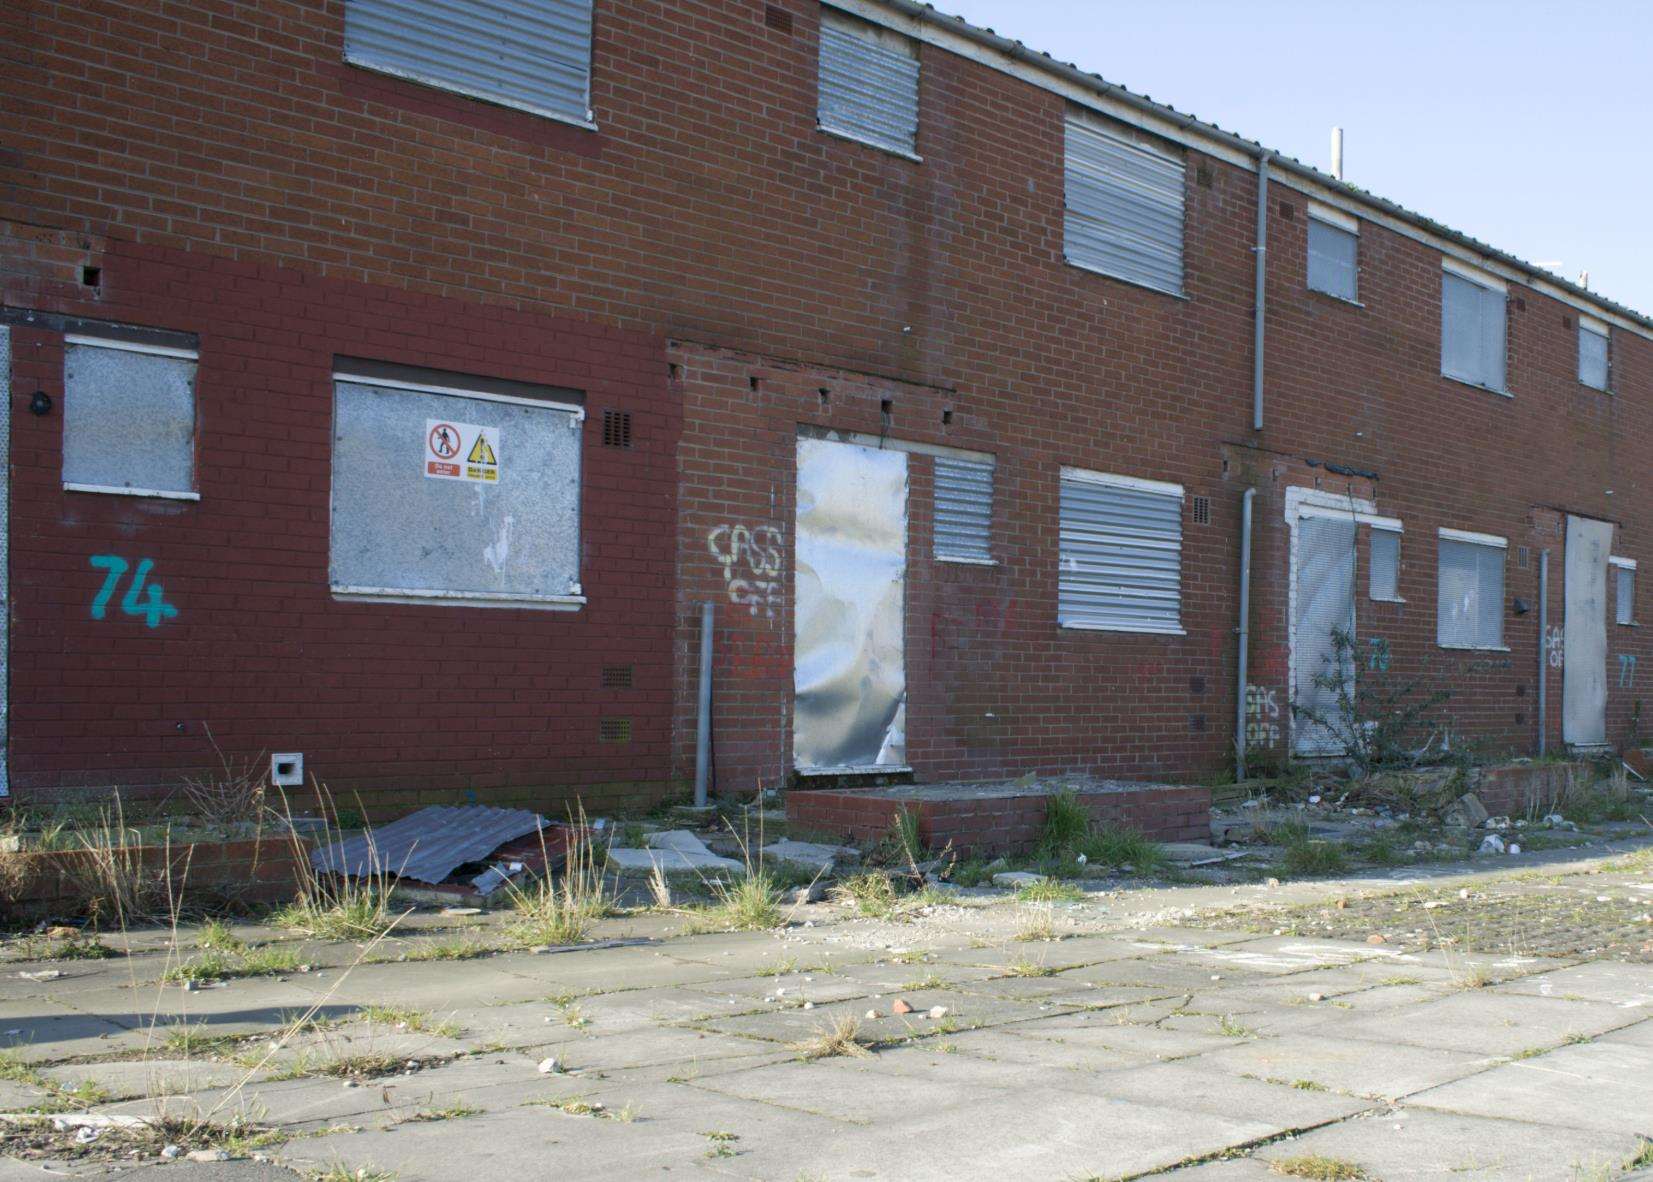 More than 7,000 houses in Kent have been empty for more than six months